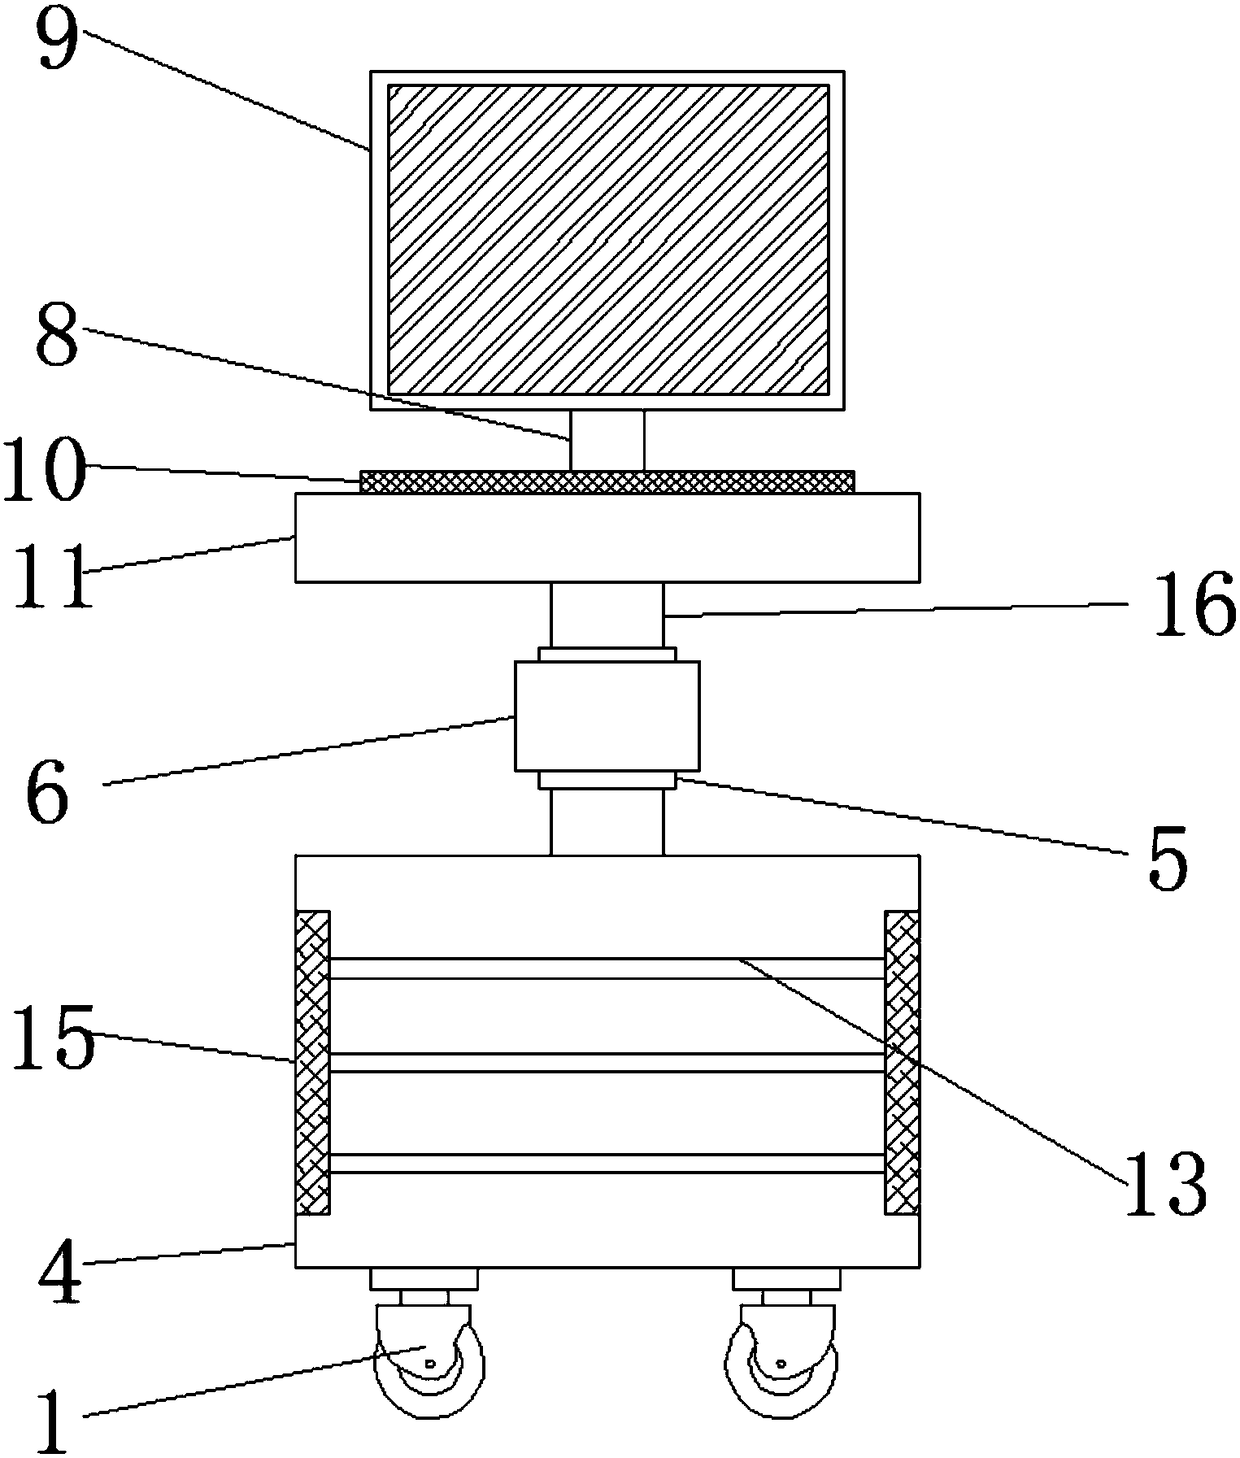 3D image processing device applied to film and television production